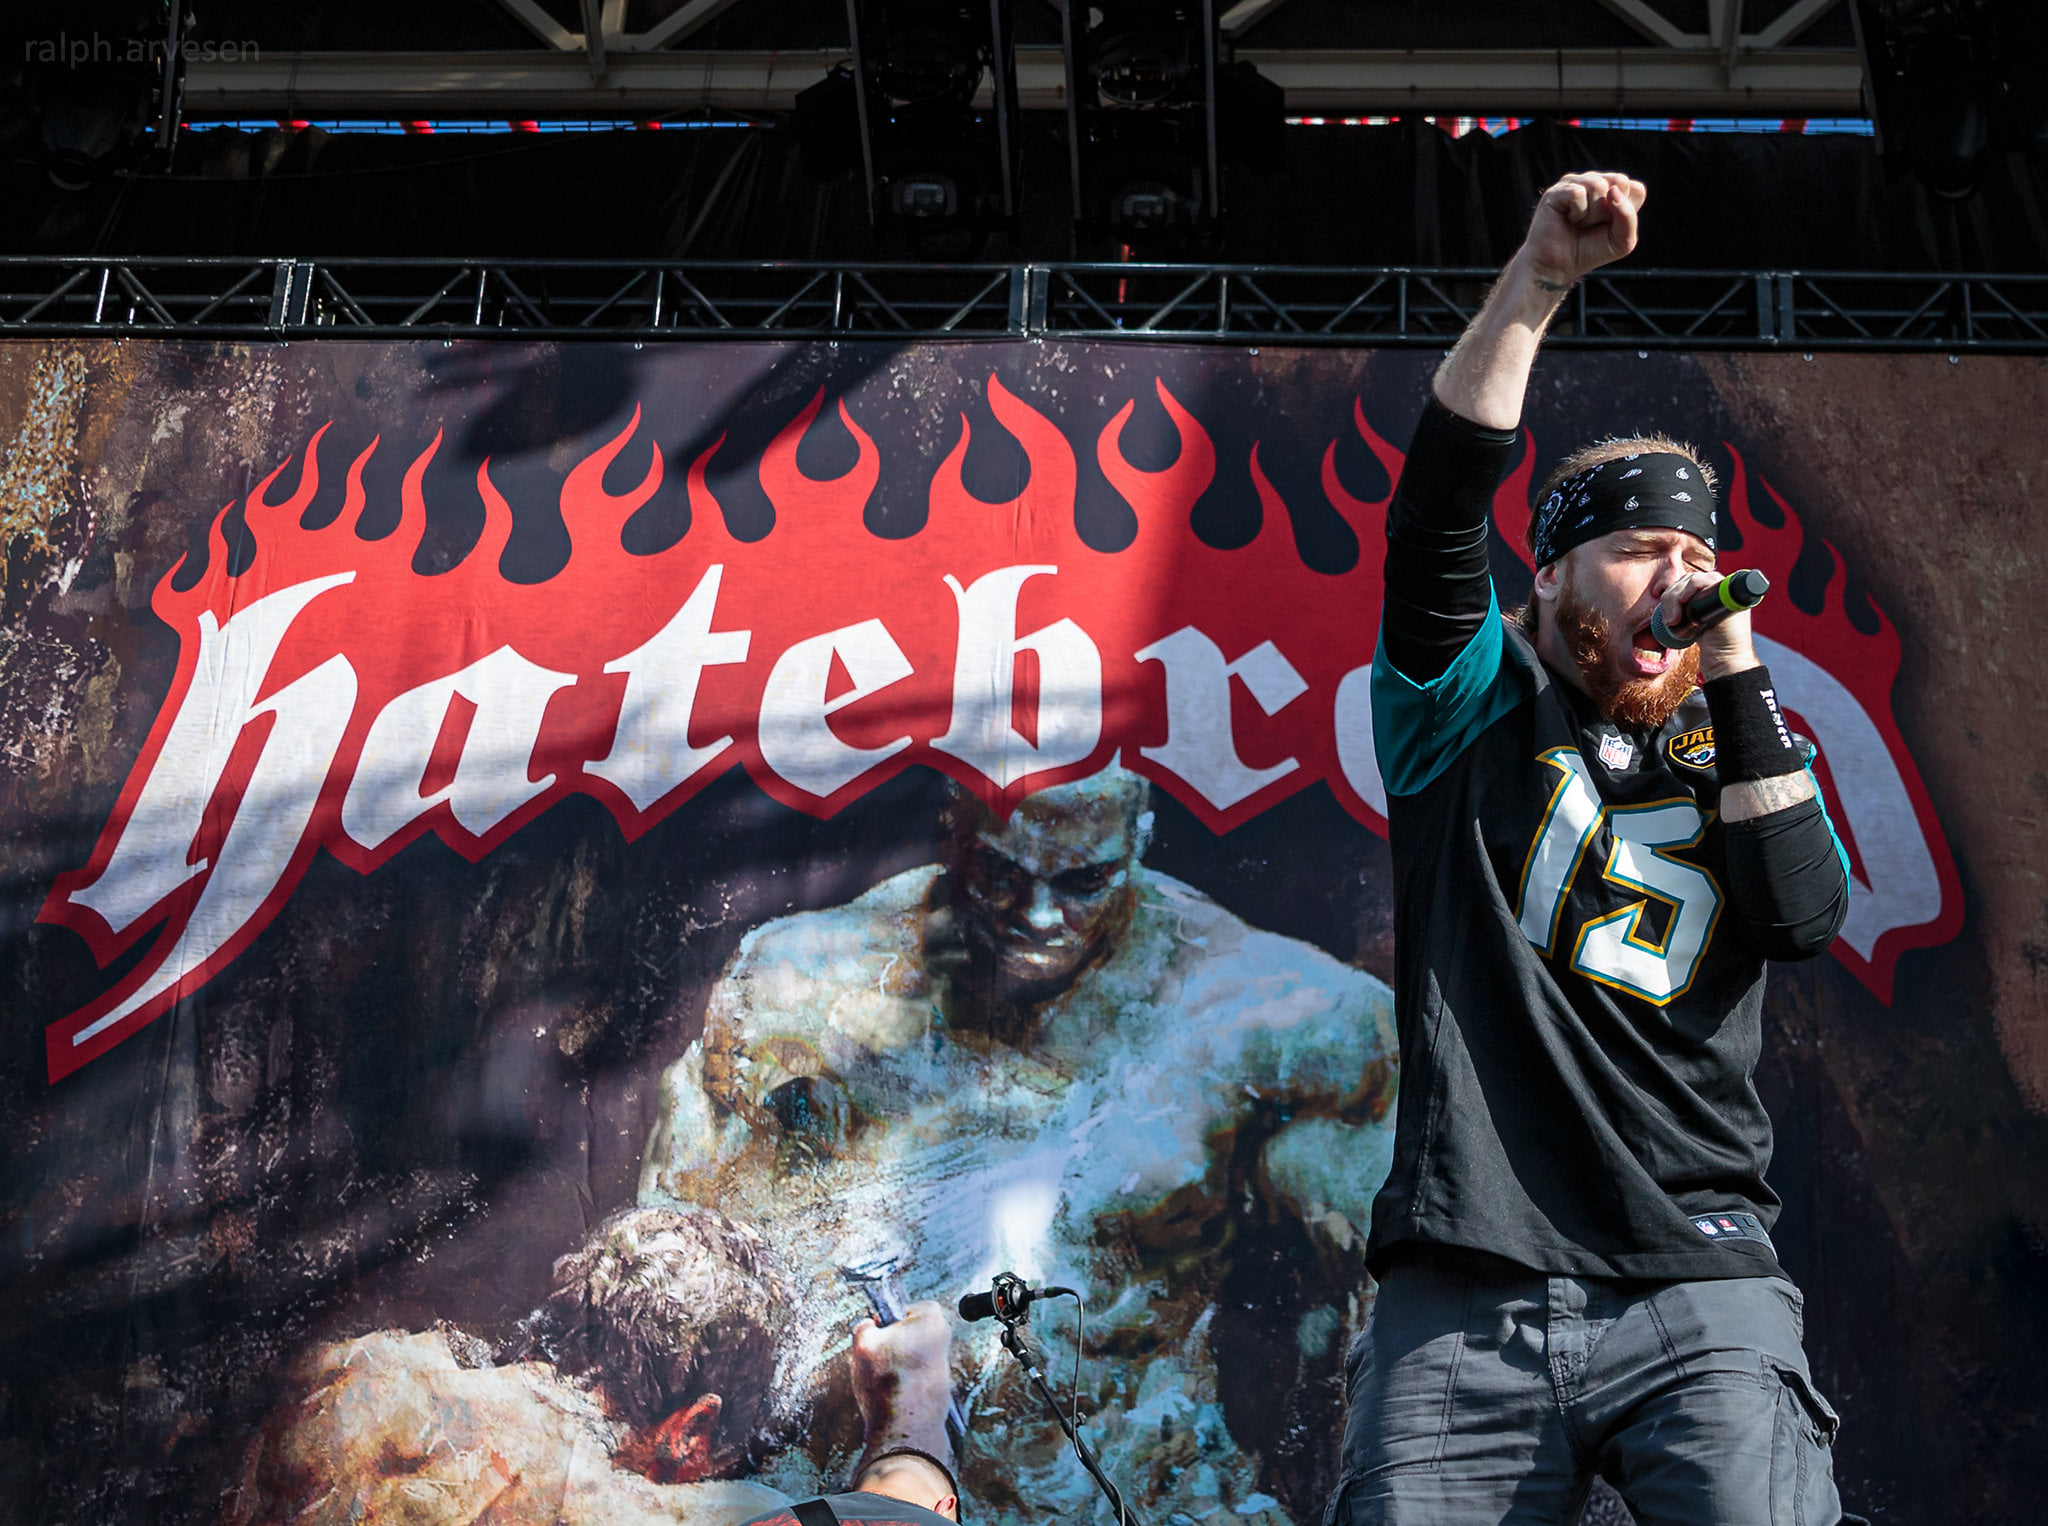 Hatebreed, 303 Magazine, 303 Music, Metal Tour of the Year